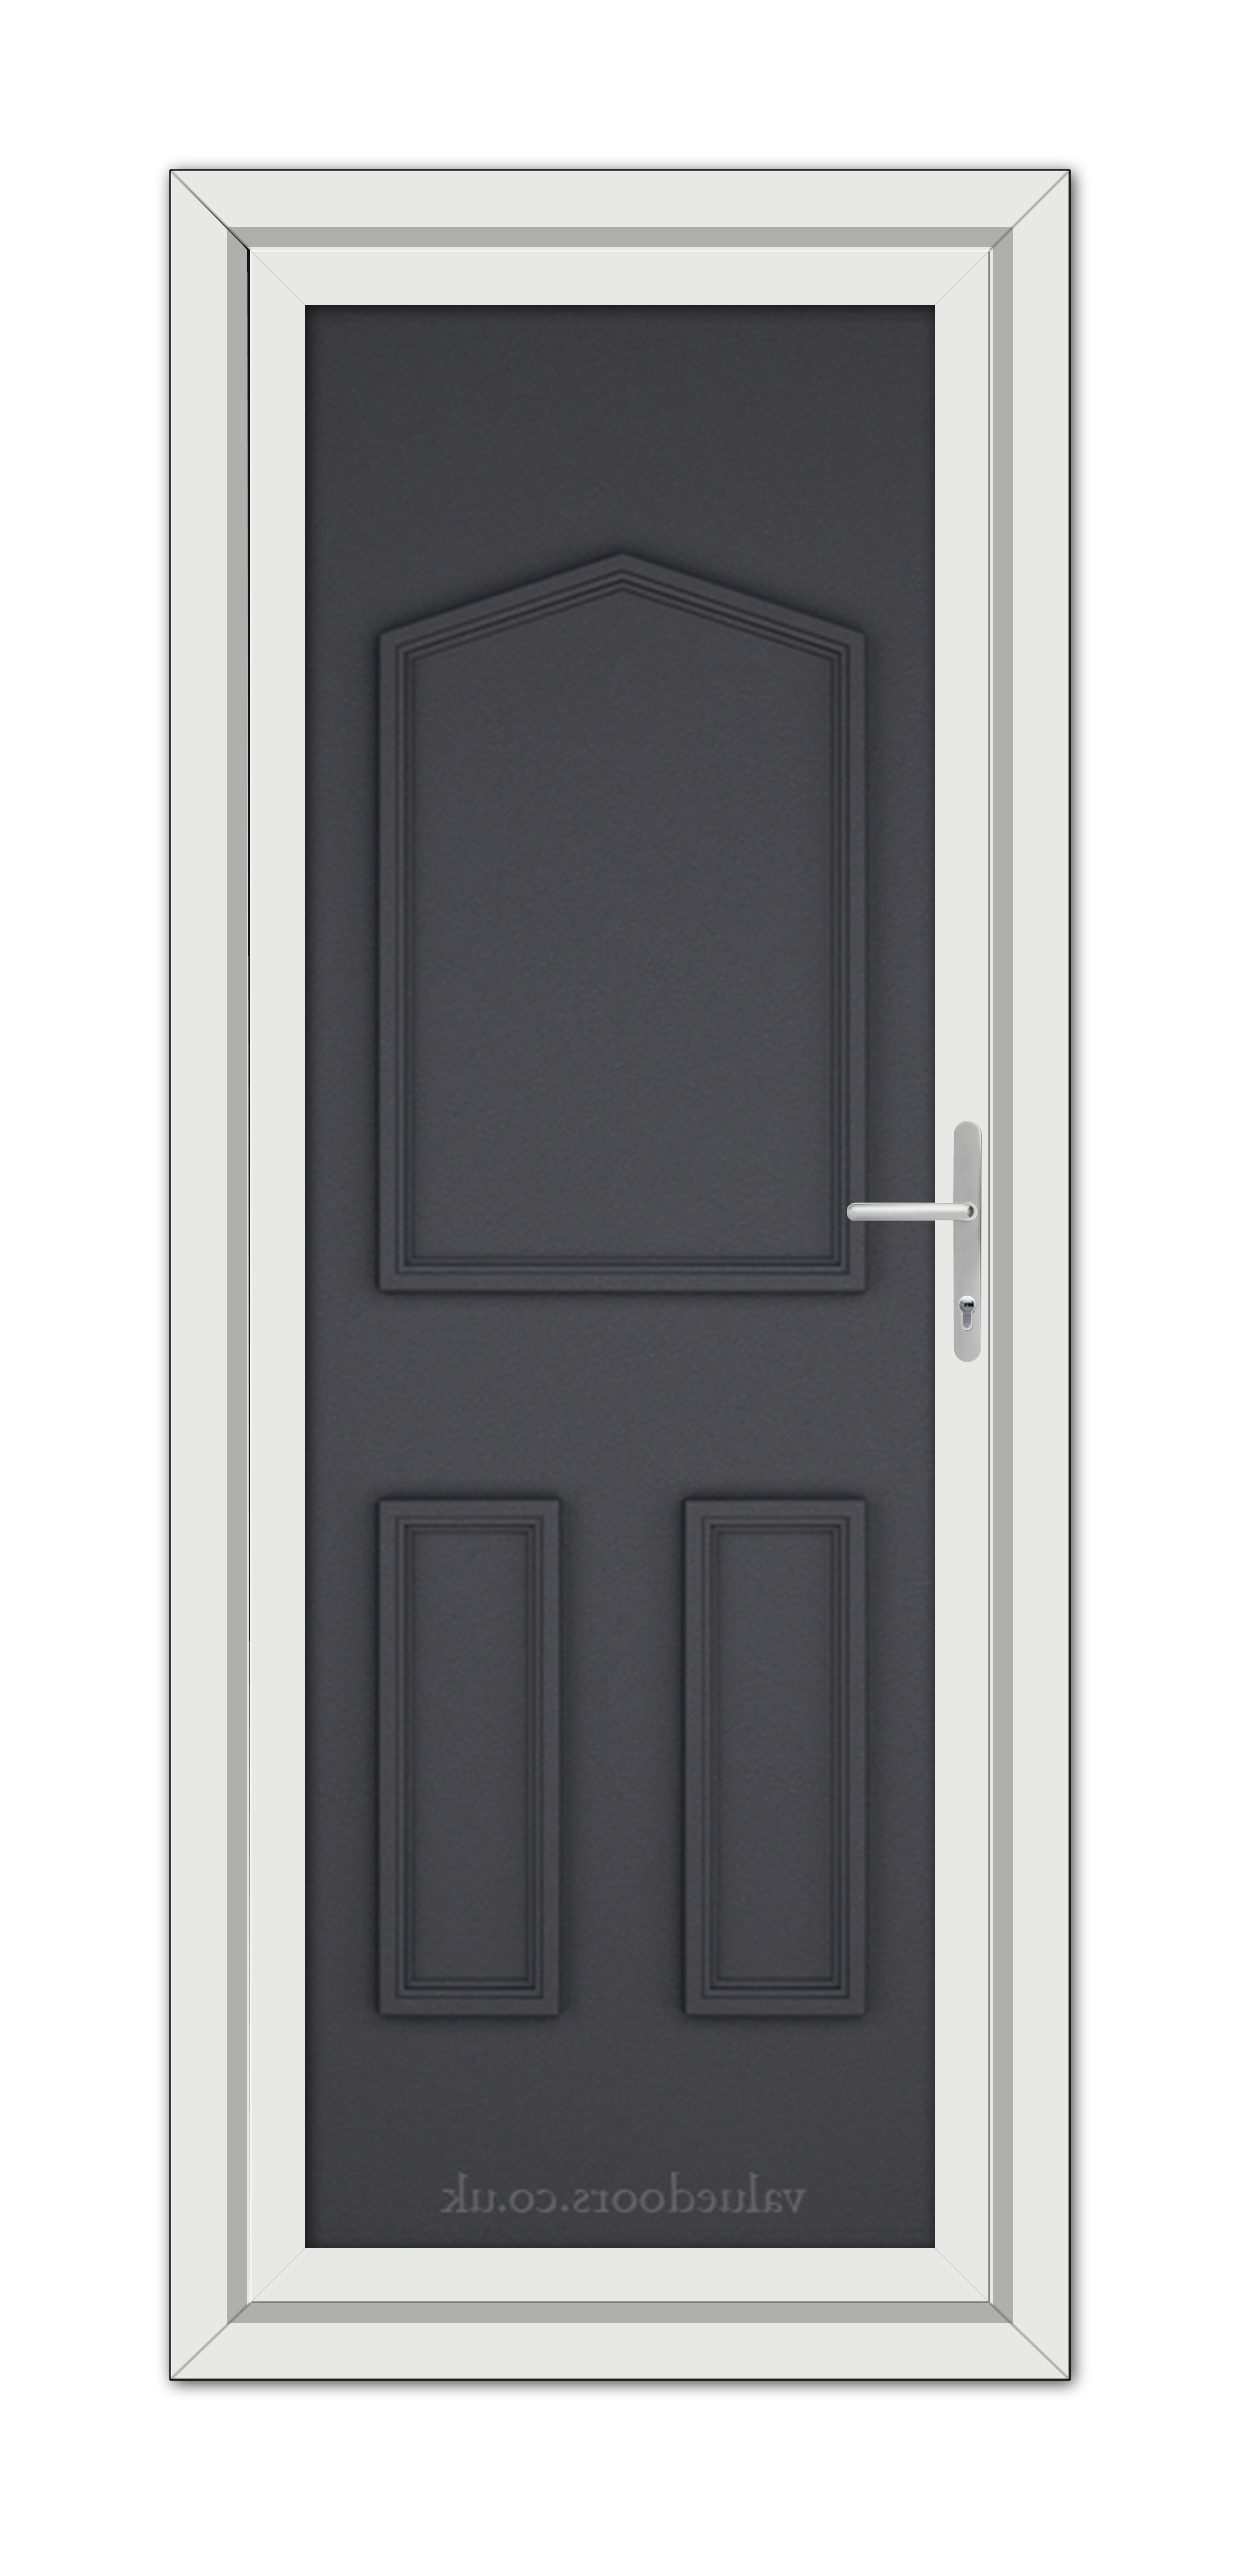 A vertical image of a Grey Grained Oxford Solid uPVC Door with a silver handle, framed by a white door frame, displayed against a white background.